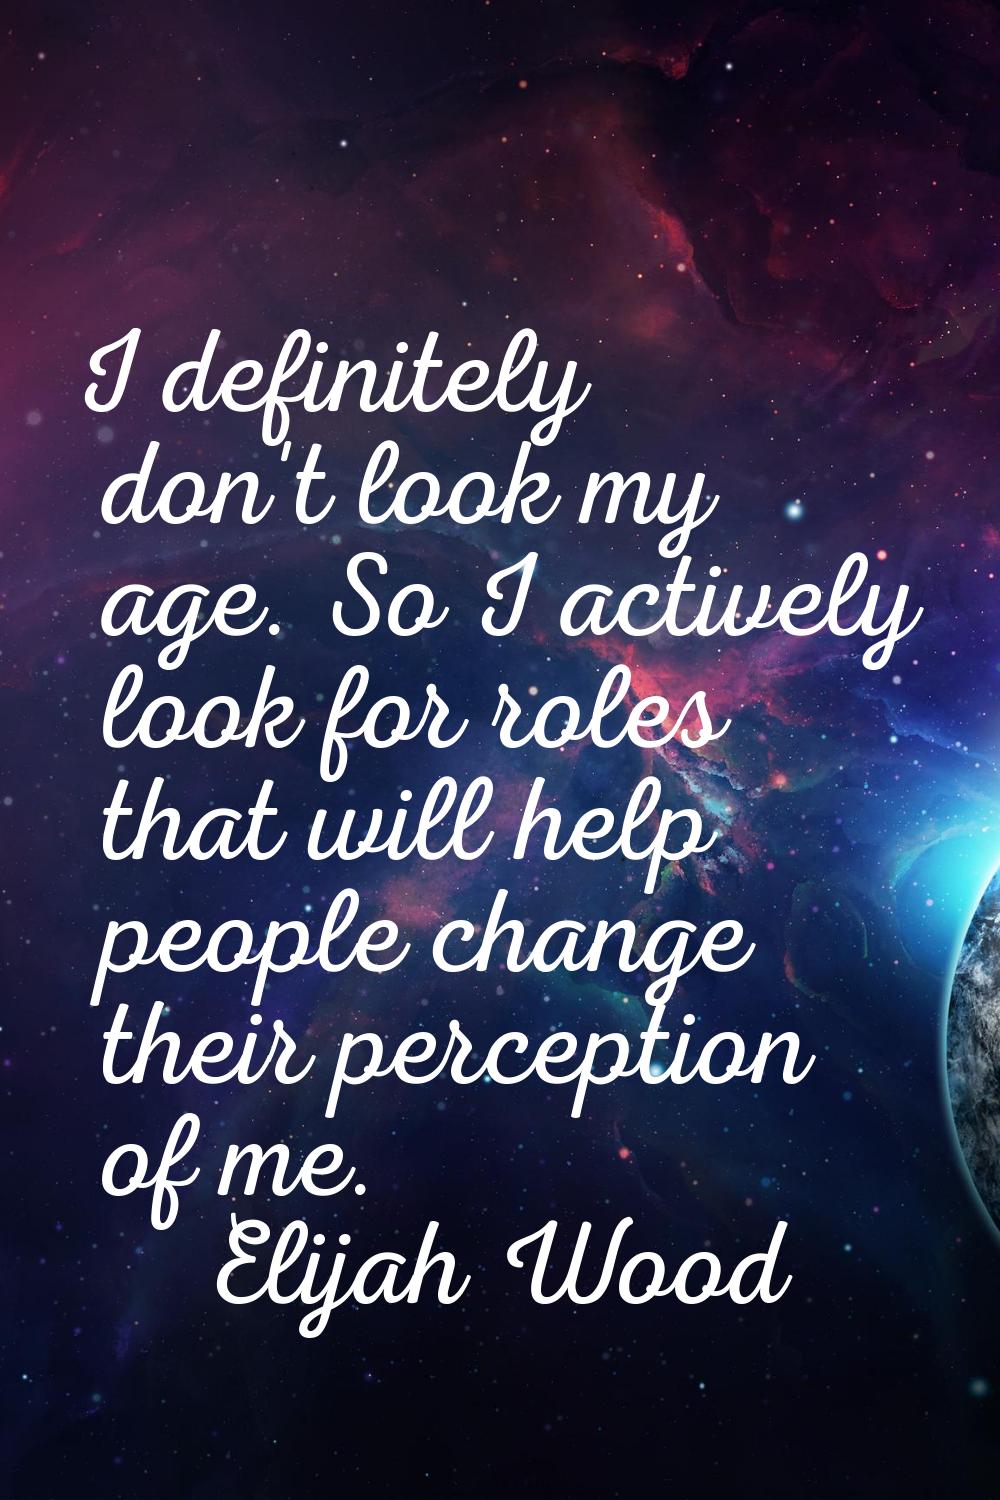 I definitely don't look my age. So I actively look for roles that will help people change their per